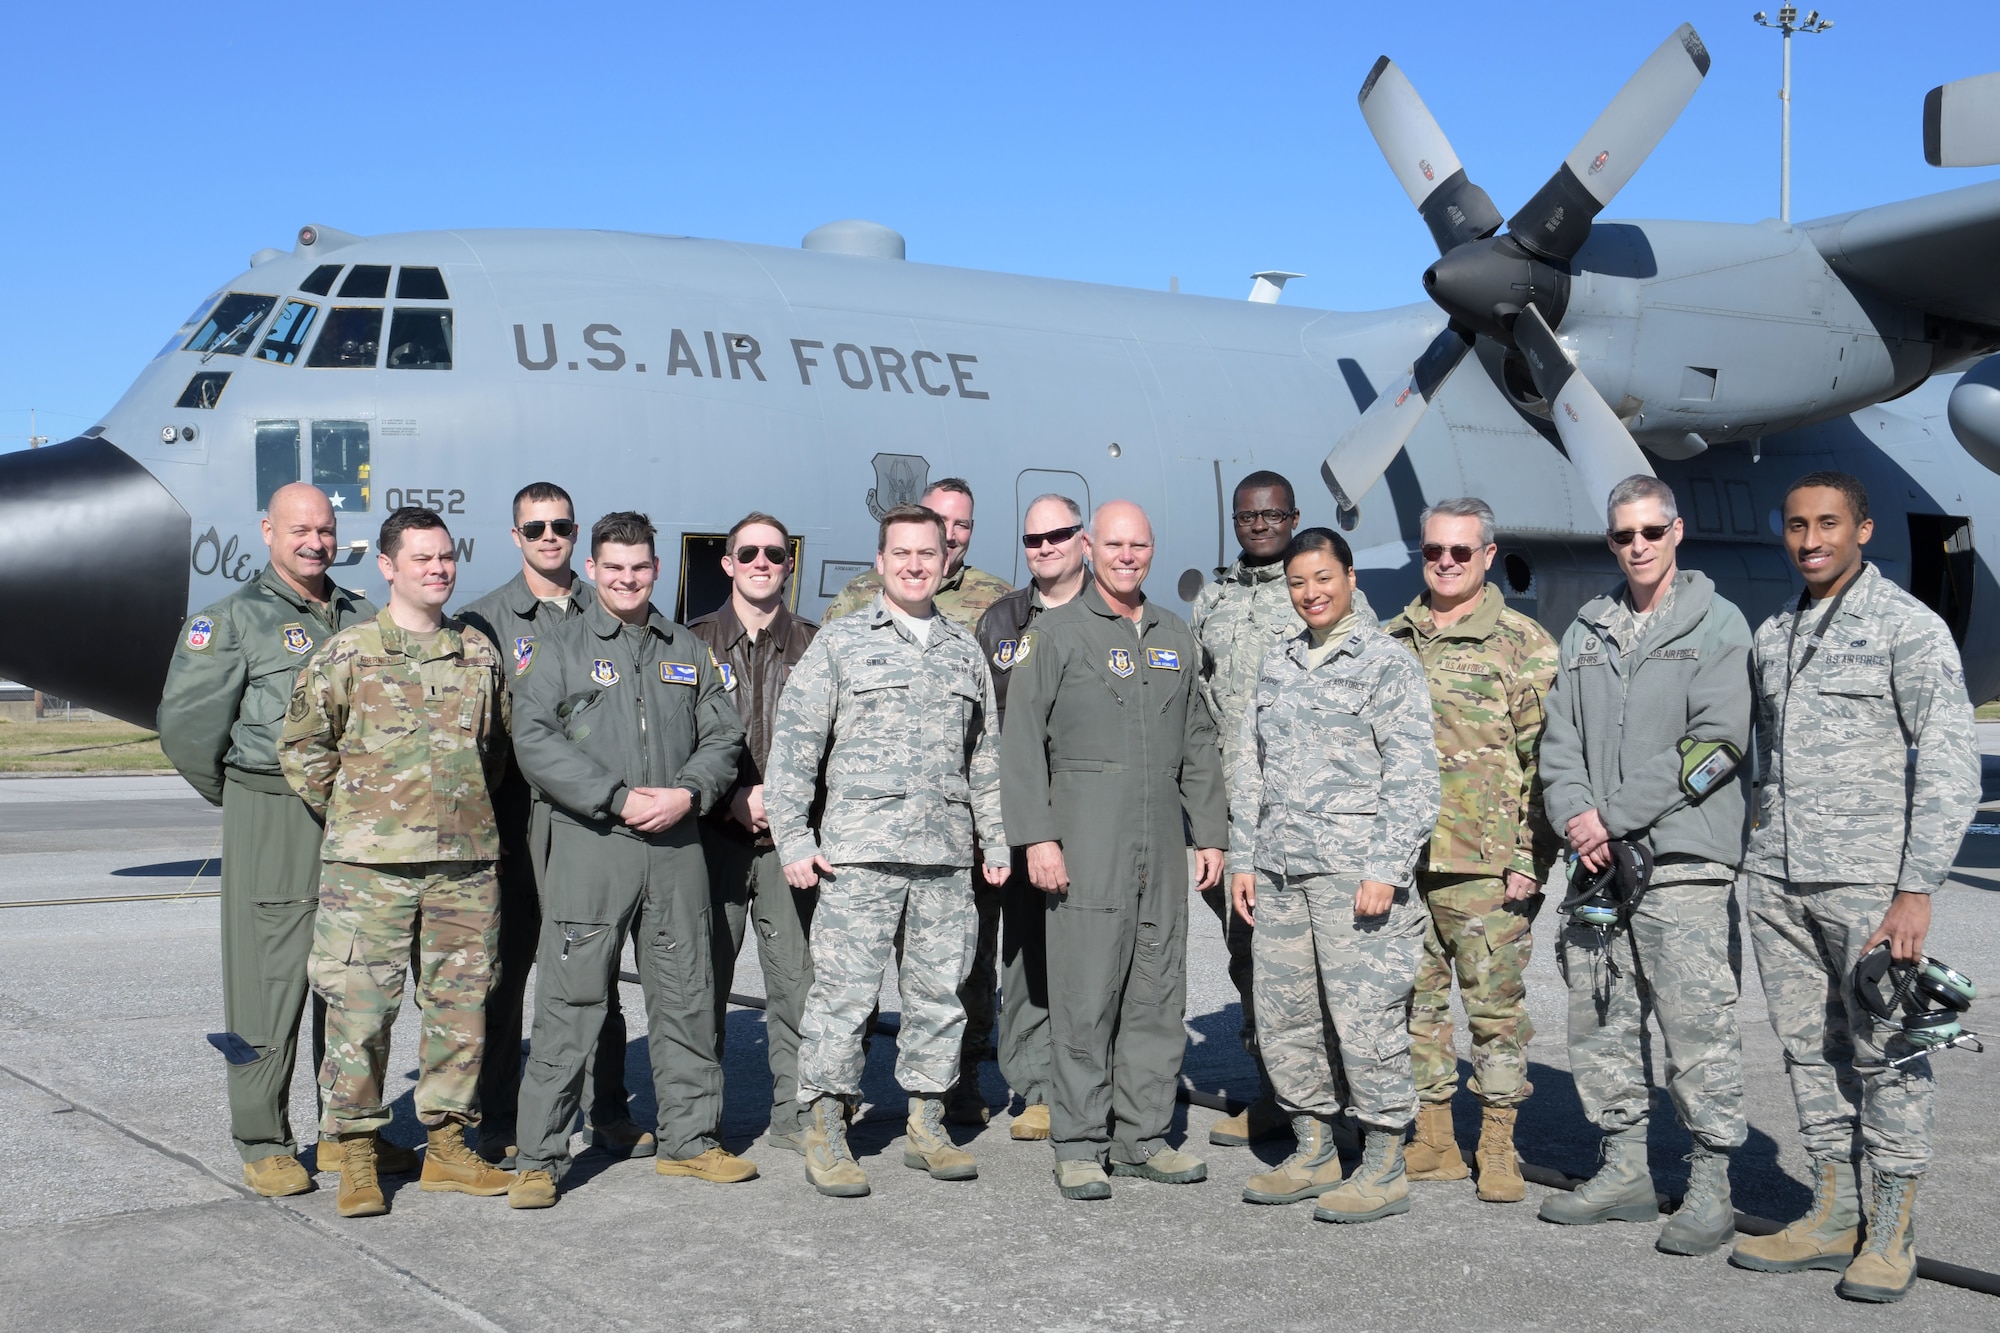 Brig. Gen. Richard Kemble, once the 94th Airlift Wing commander, center, poses for a group photo with the new commander, Col. Craig McPike, and Airmen from Dobbins shortly after landing at Dobbins Air Reserve Base, Ga. on Dec. 20, 2019. The flight marked 6,000 flying hours for Kemble. (U.S. Air Force photo/Tech. Sgt. Andrew Park)